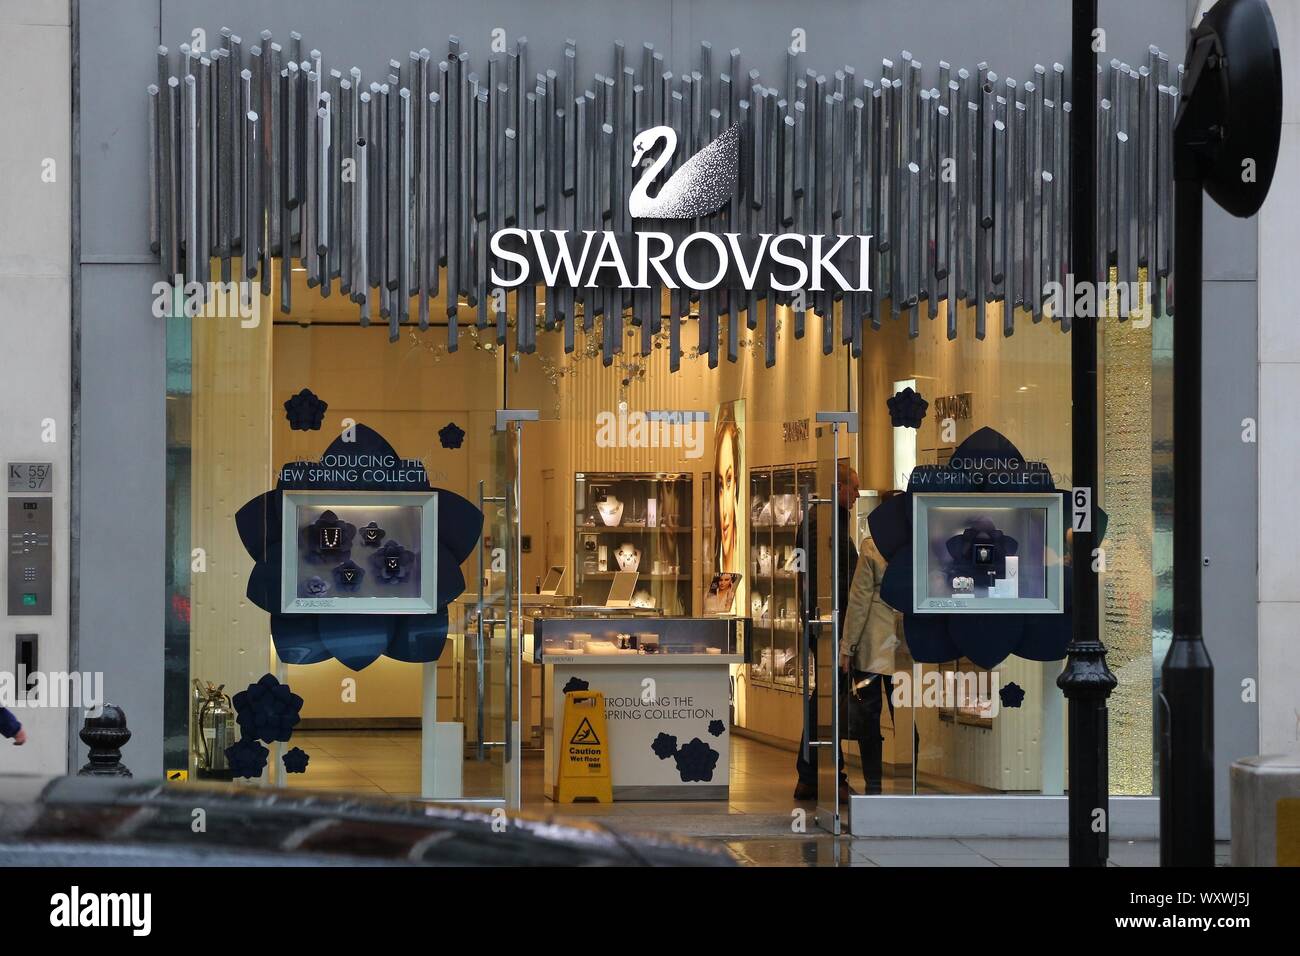 Swarovski Jewelry Store High Resolution Stock Photography and Images - Alamy